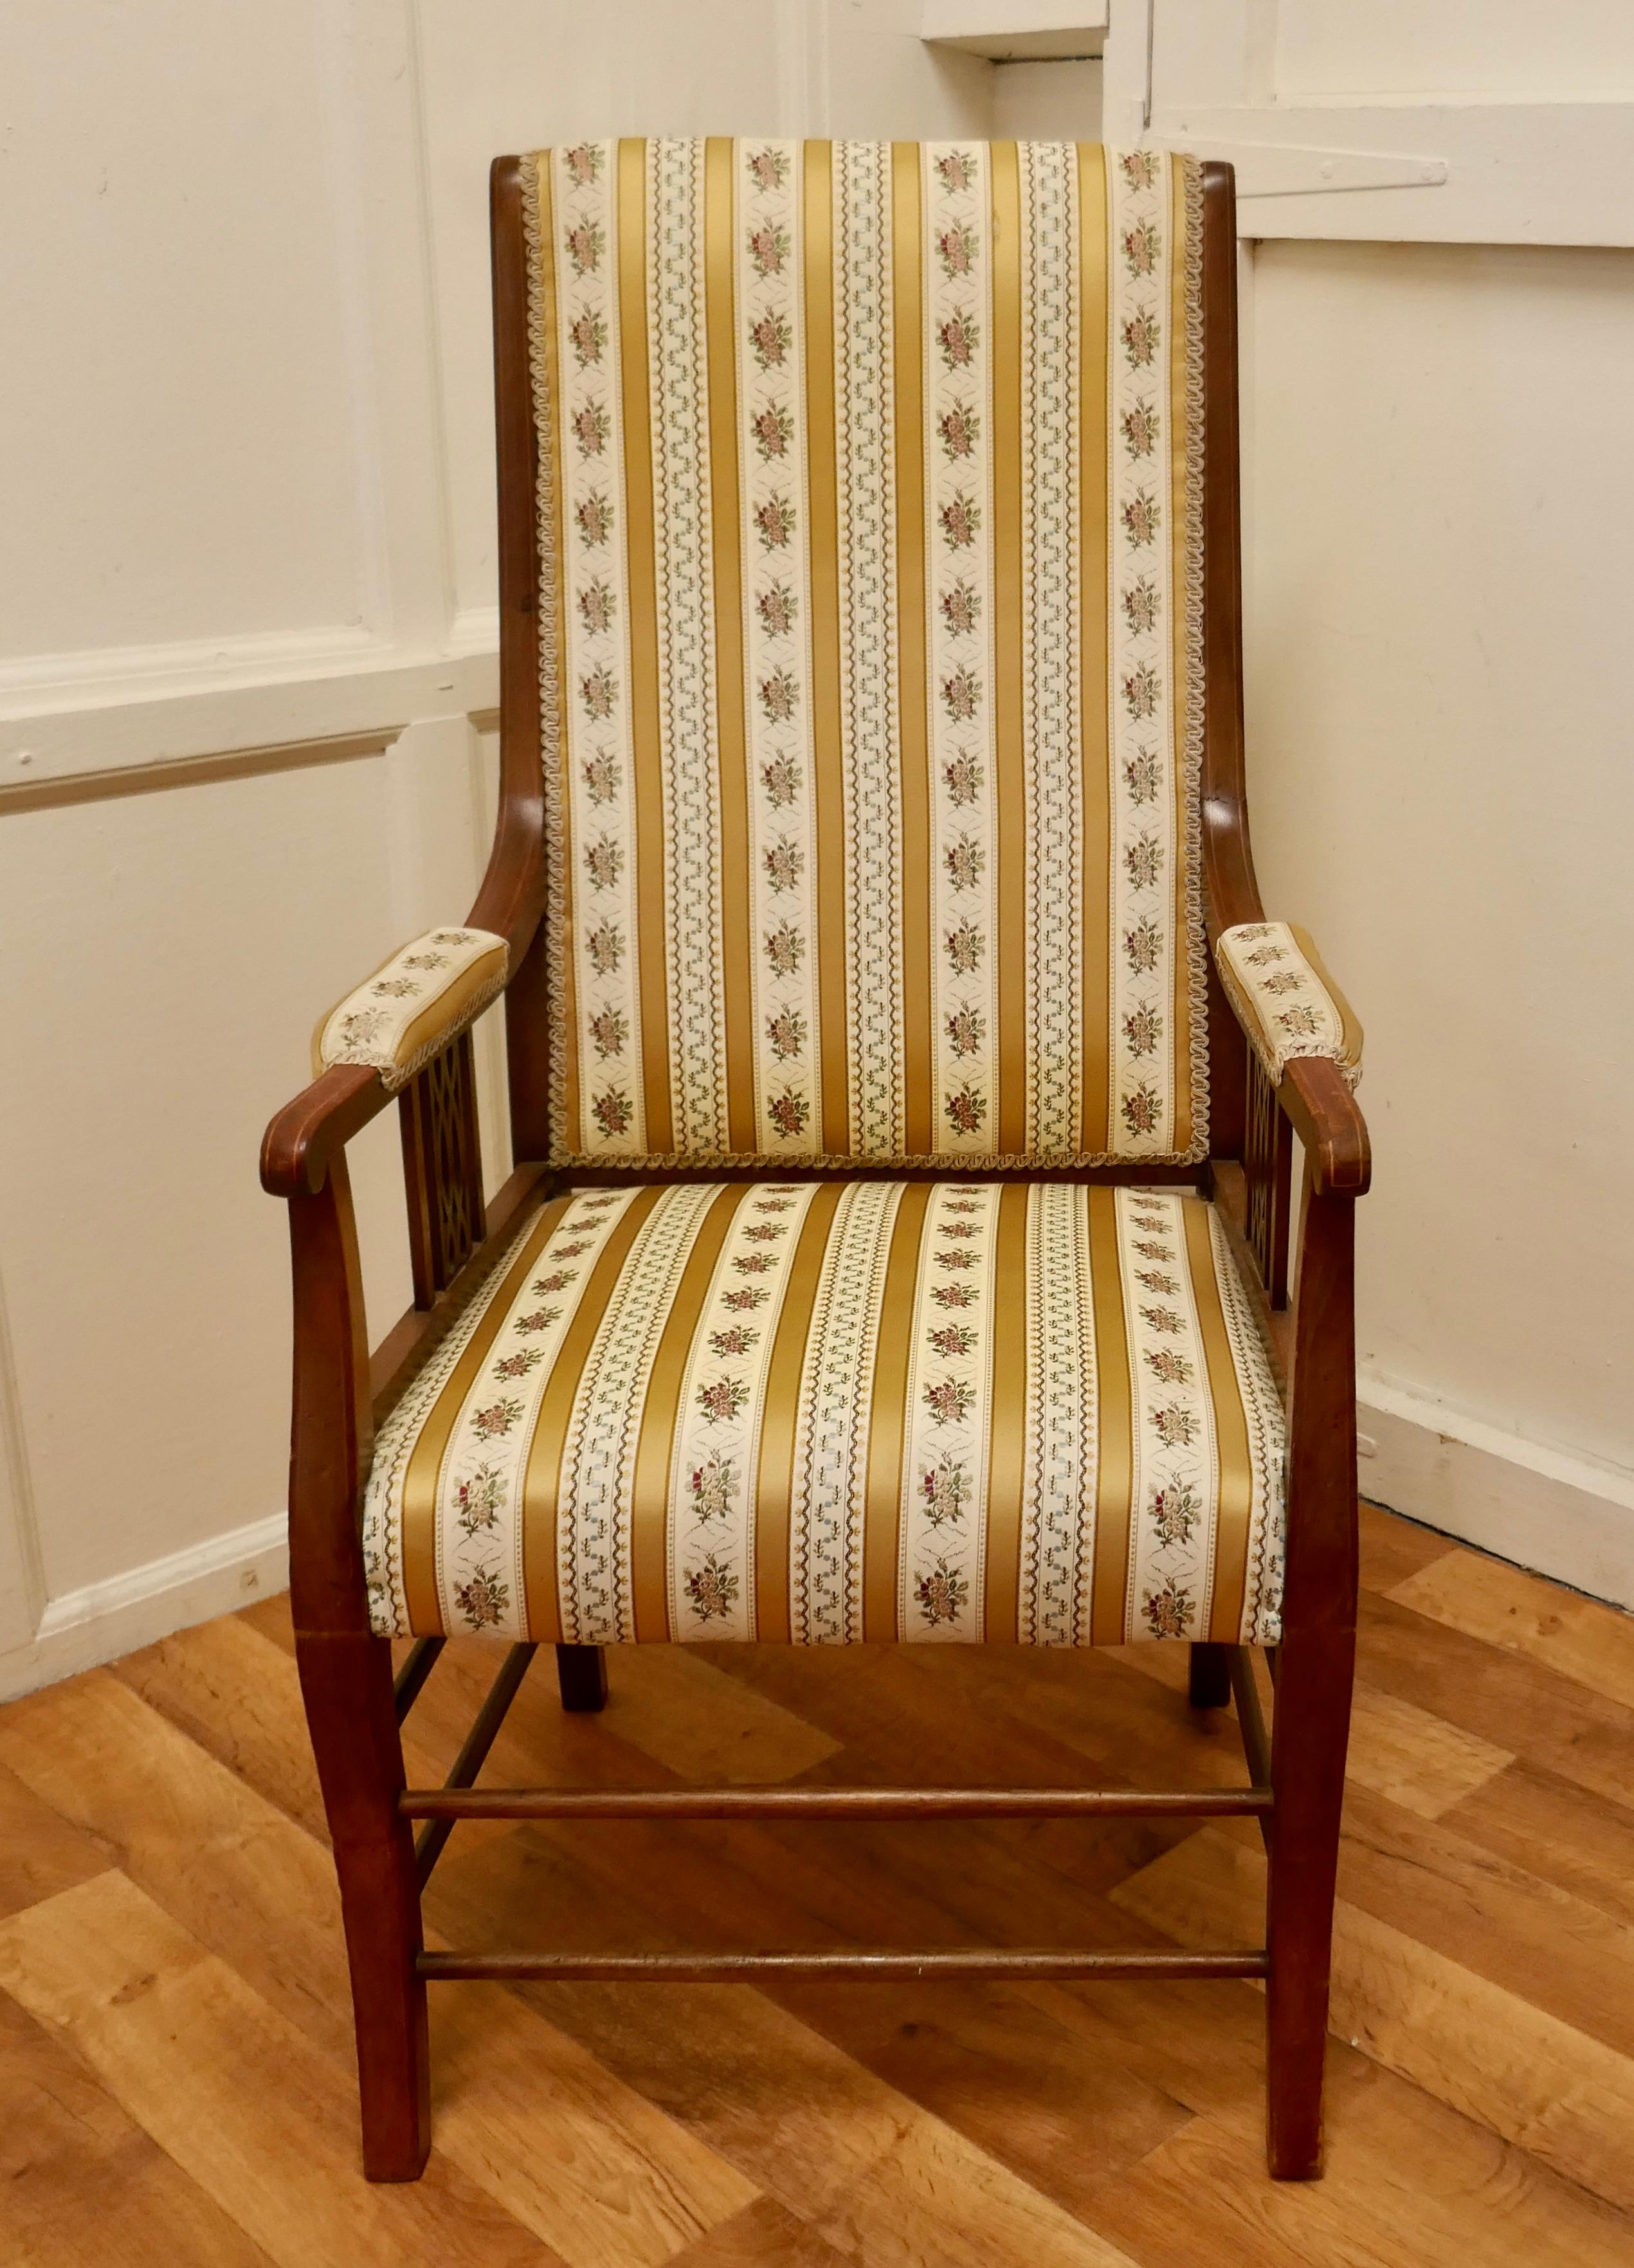 A fine quality regency style high back upholstered arm chair

This is a superbly comfortable Edwardian Walnut arm chair, it has a straight deep back, the chair is upholstered in a dainty regency stripe fabric
The chair has a polished frame, the